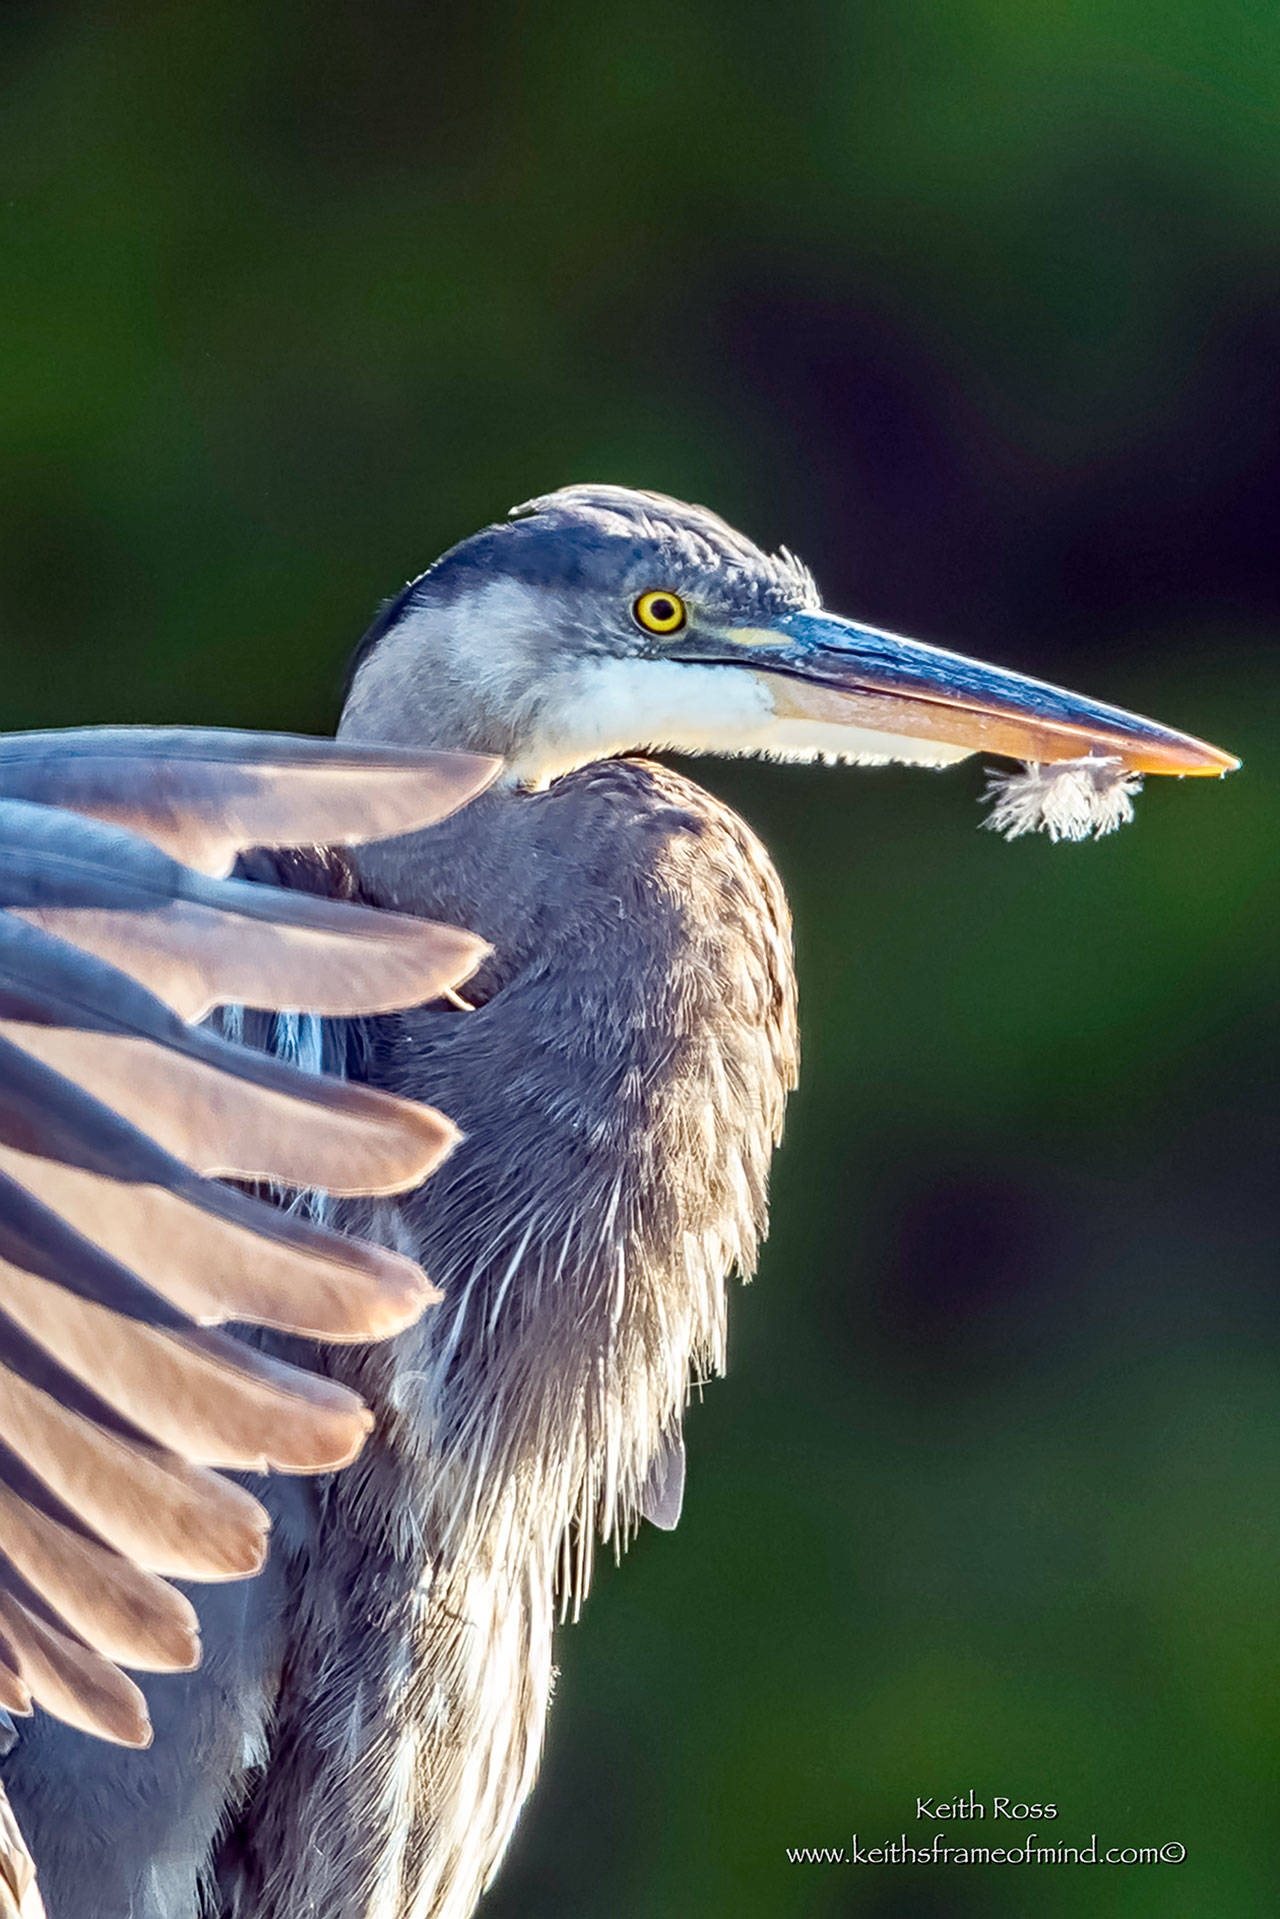 Harbor Art features the photography of Keith Ross this month including “Great Blue Heron — Portrait.”